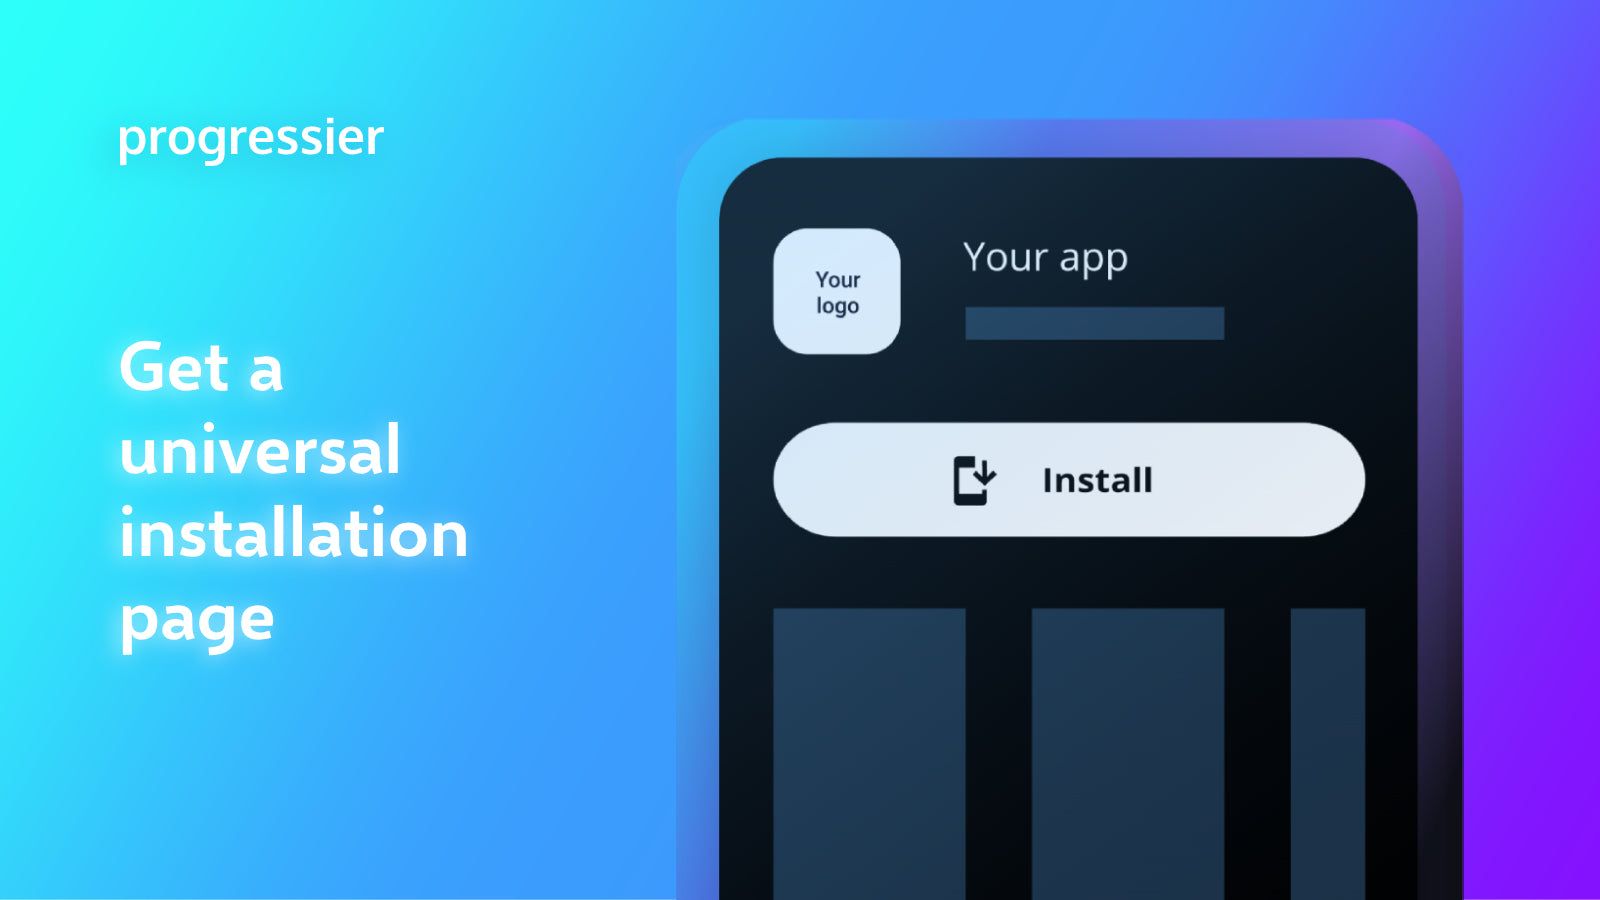 Get a universal installation page